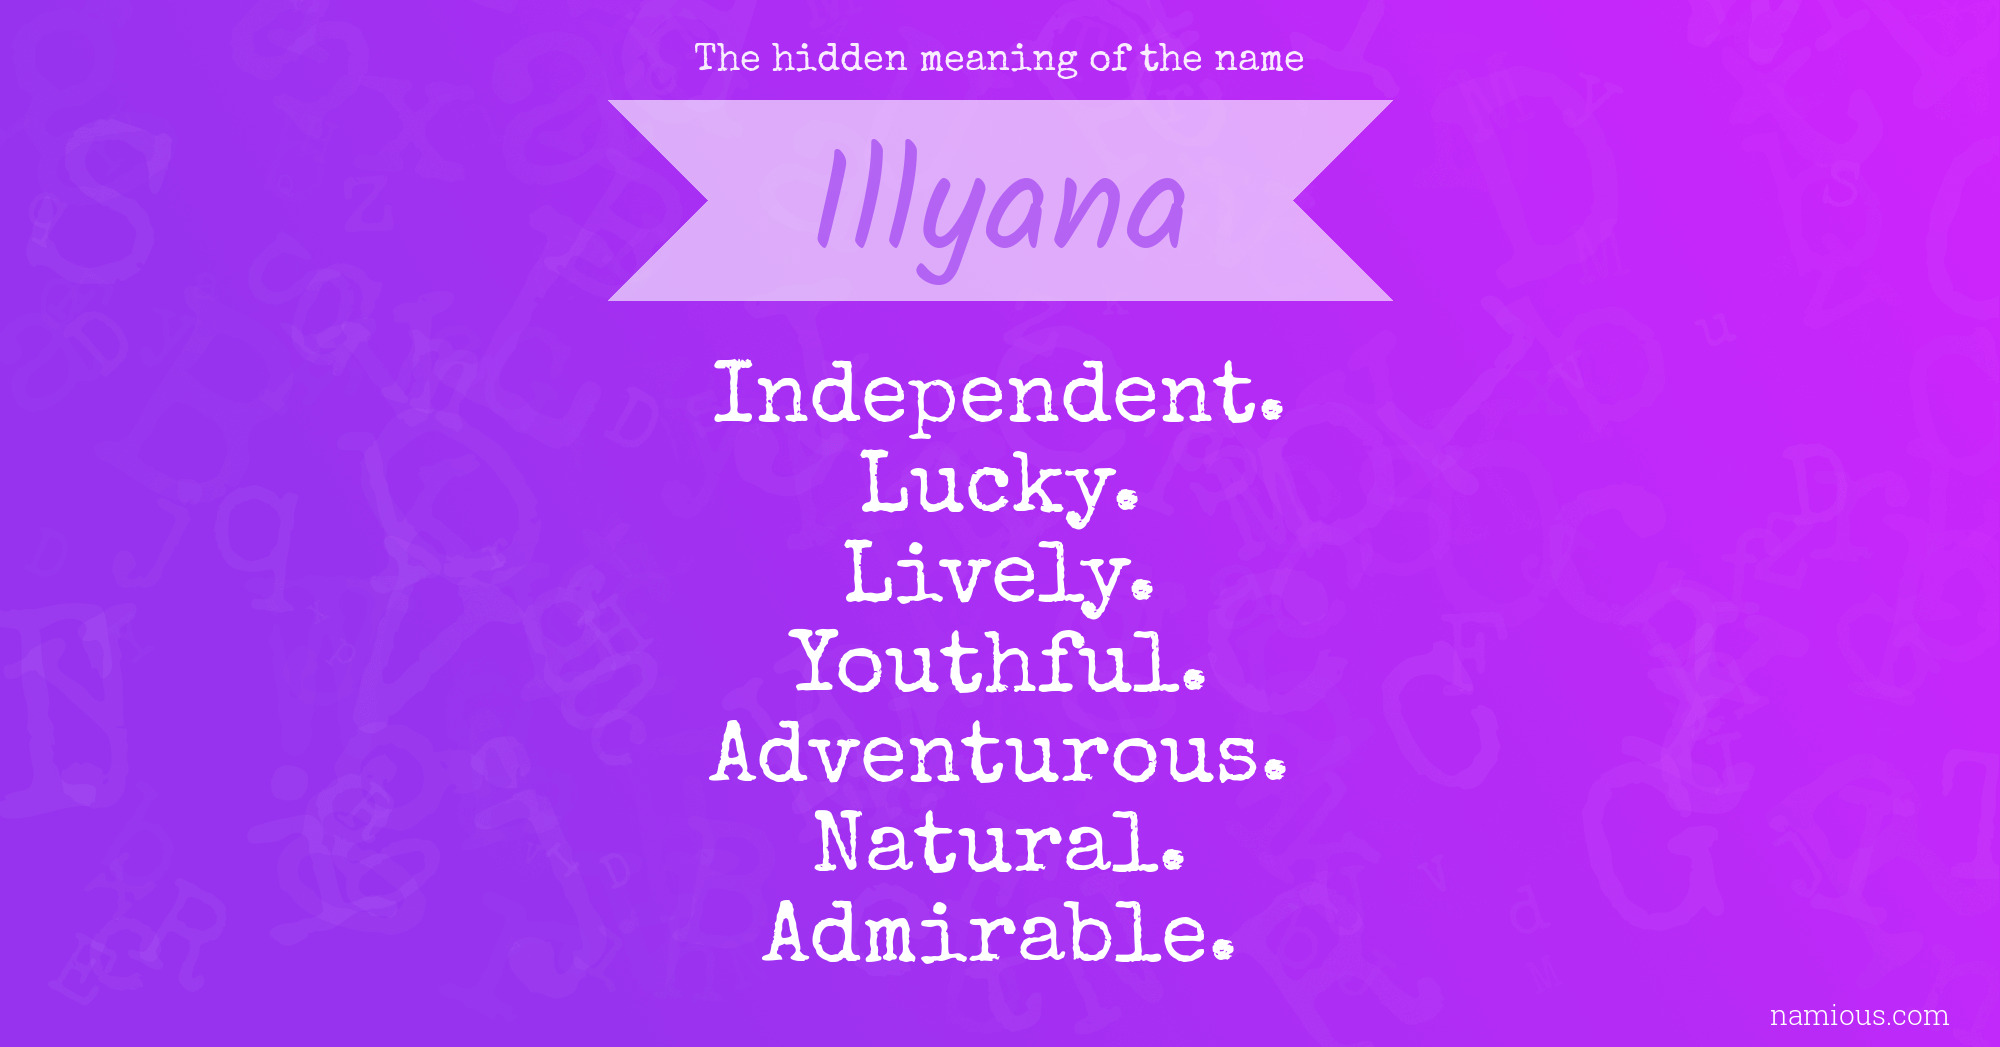 The hidden meaning of the name Illyana